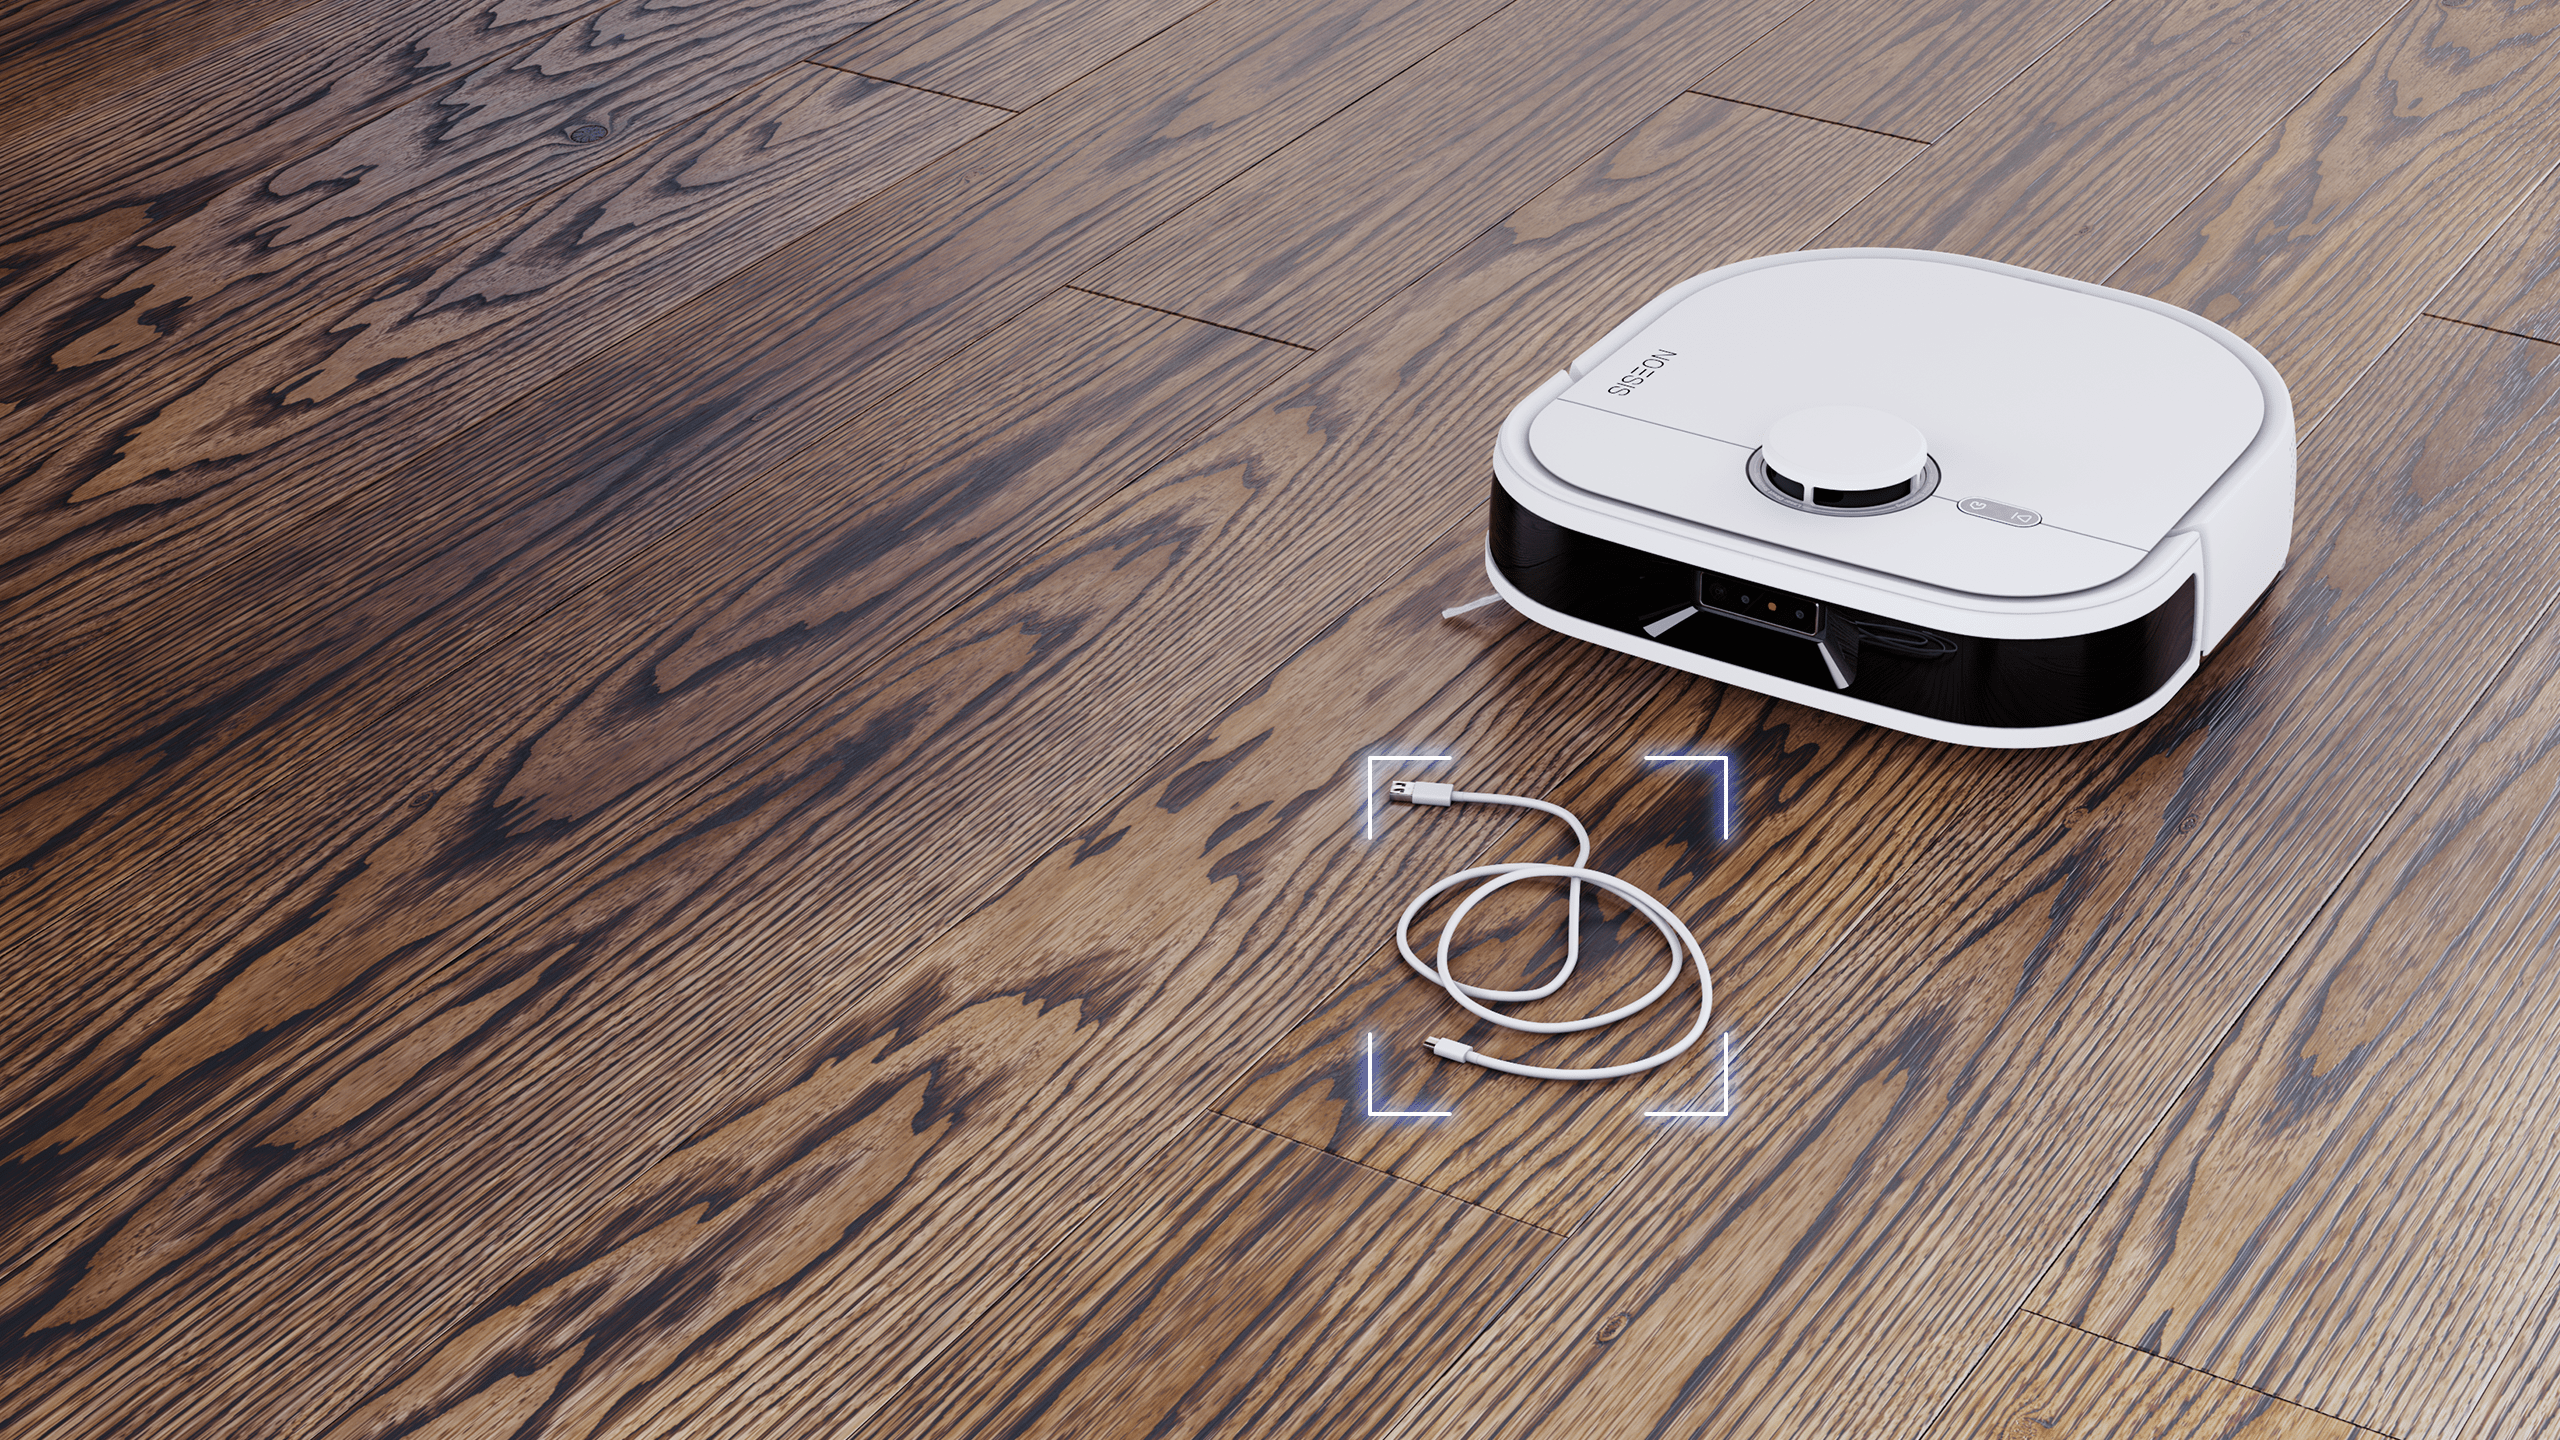 Noesis Robot NeuralVision detecting phone charger on wooden floors